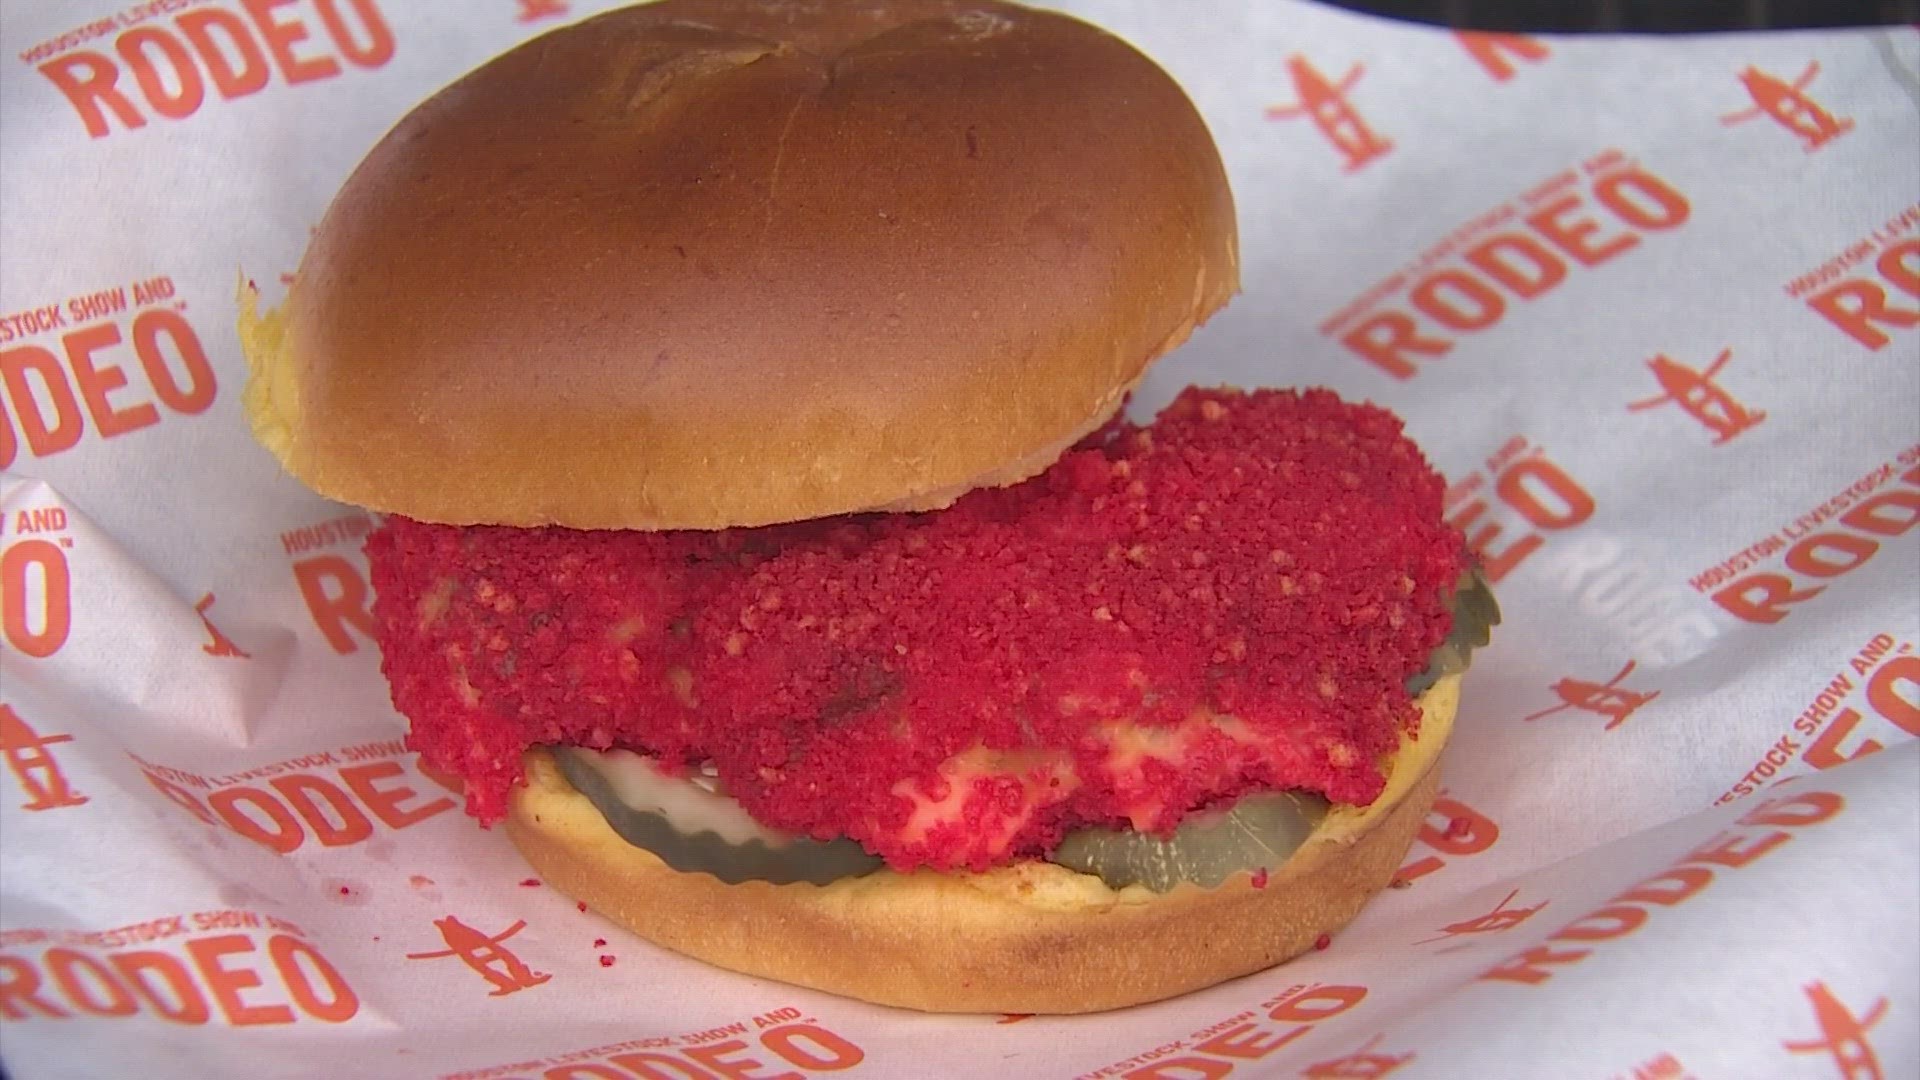 Here's a look at the food you'll see around RodeoHouston this year!